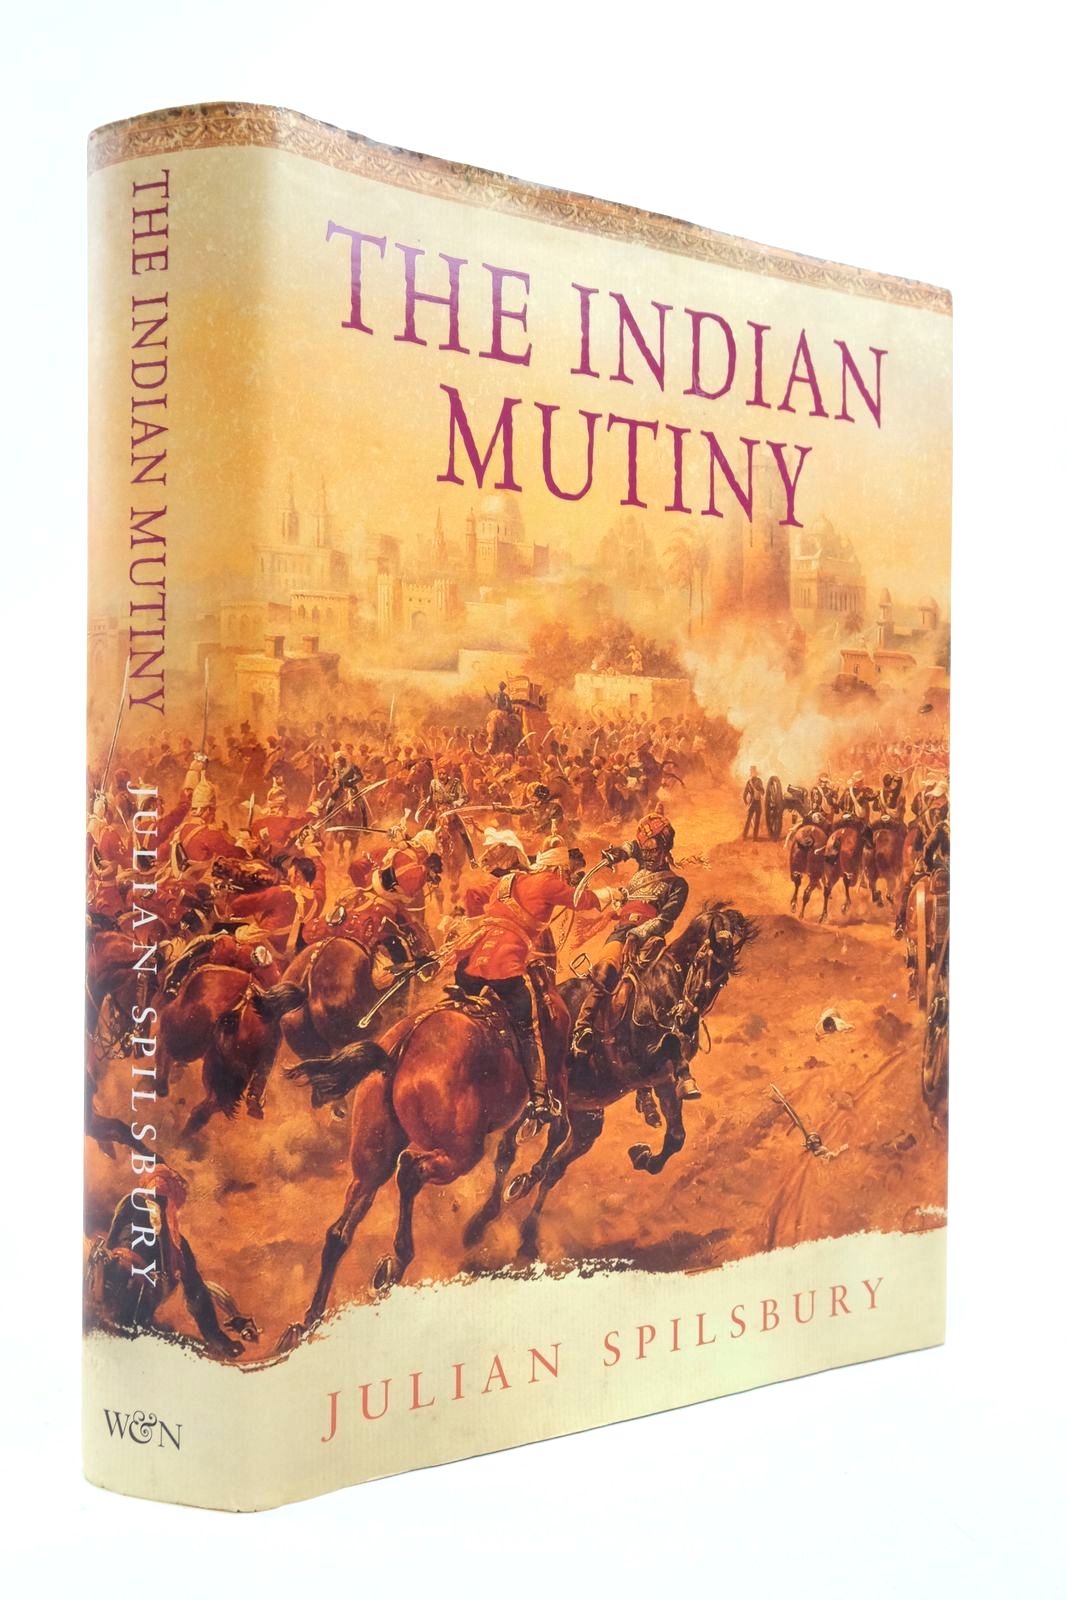 Photo of THE INDIAN MUTINY written by Spilsbury, Julian published by Weidenfeld and Nicolson (STOCK CODE: 2138541)  for sale by Stella & Rose's Books